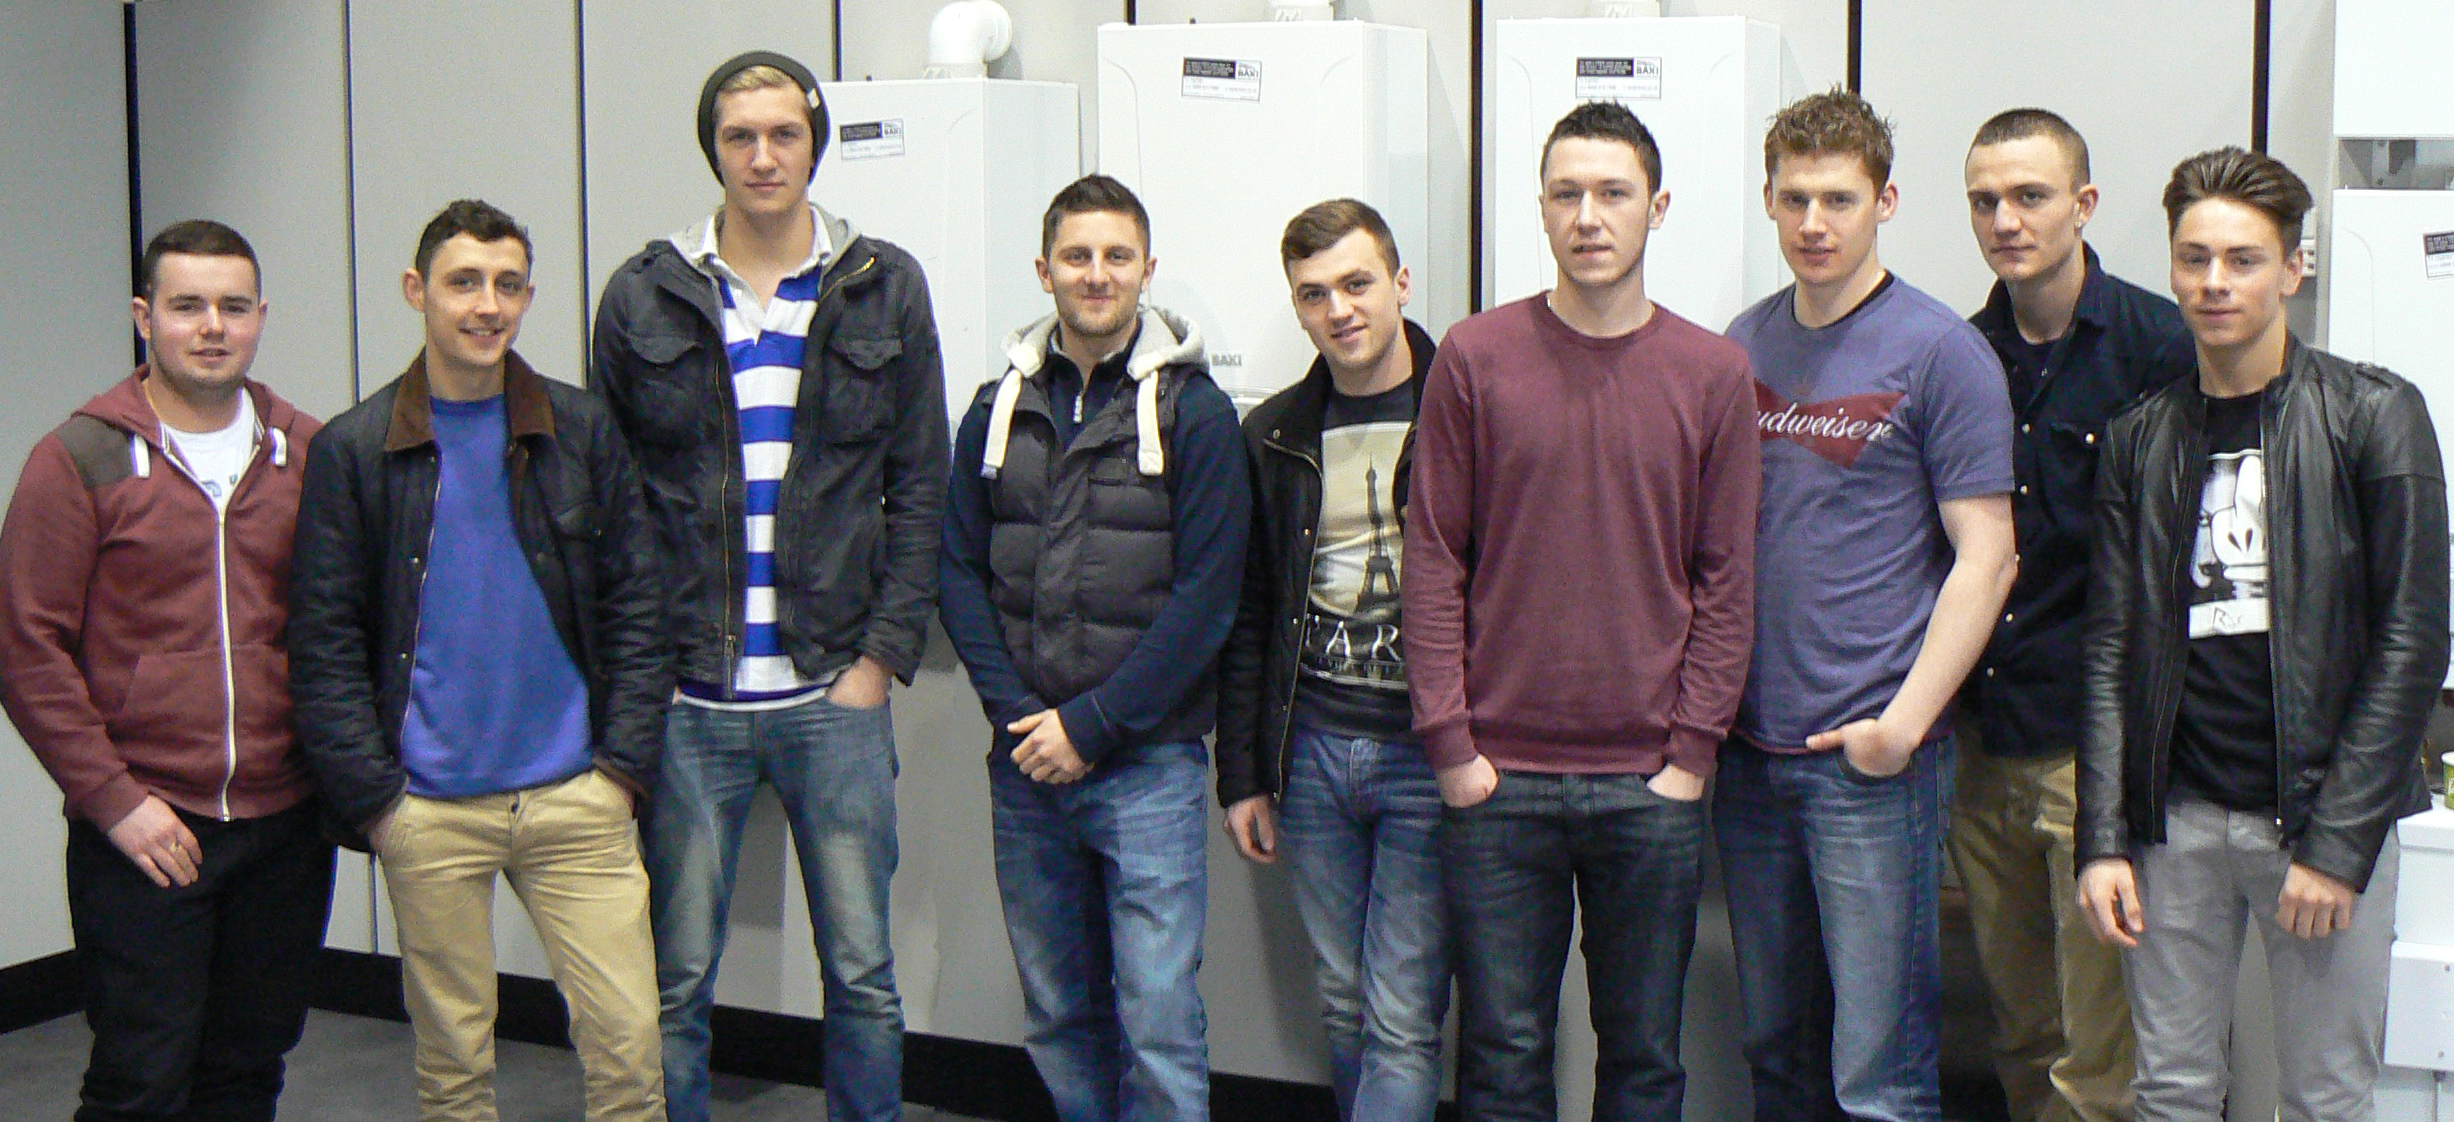 Students that completed NVQ level 3 in April 2013